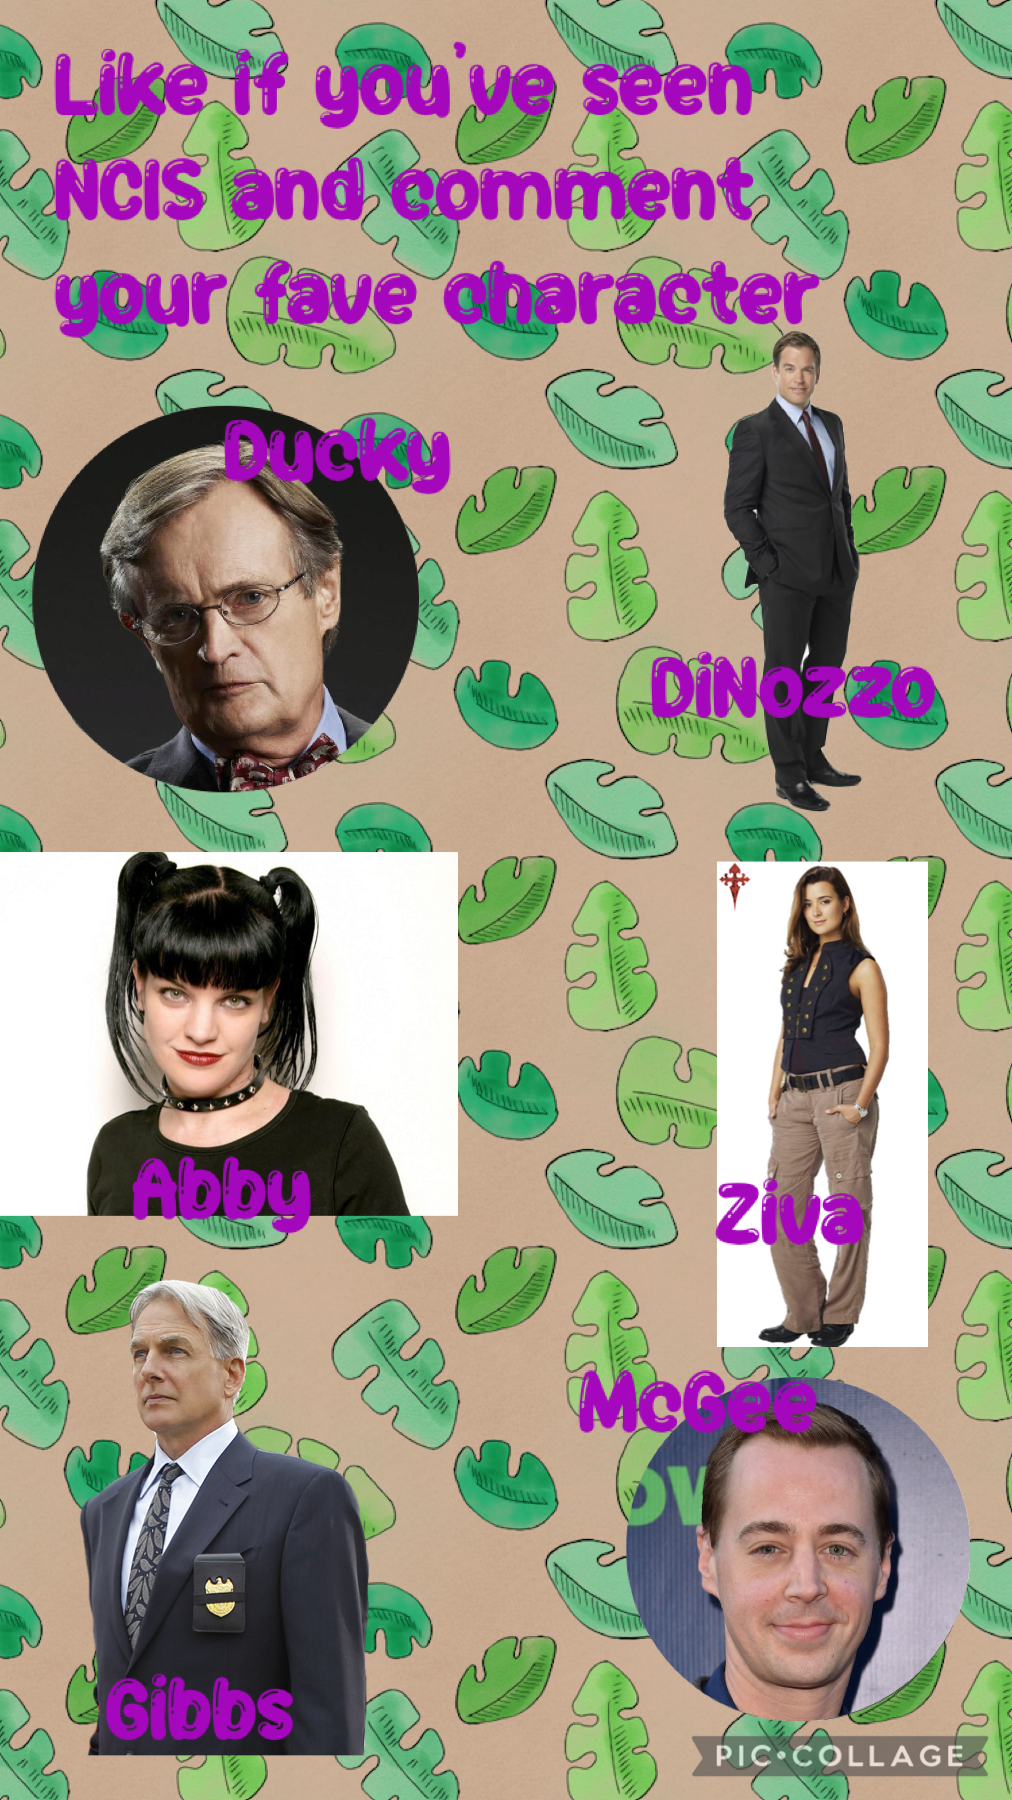 👻WILDTHINGS👻

Comment your favorite NGIZ character!
Like if you’ve seen NCIS!